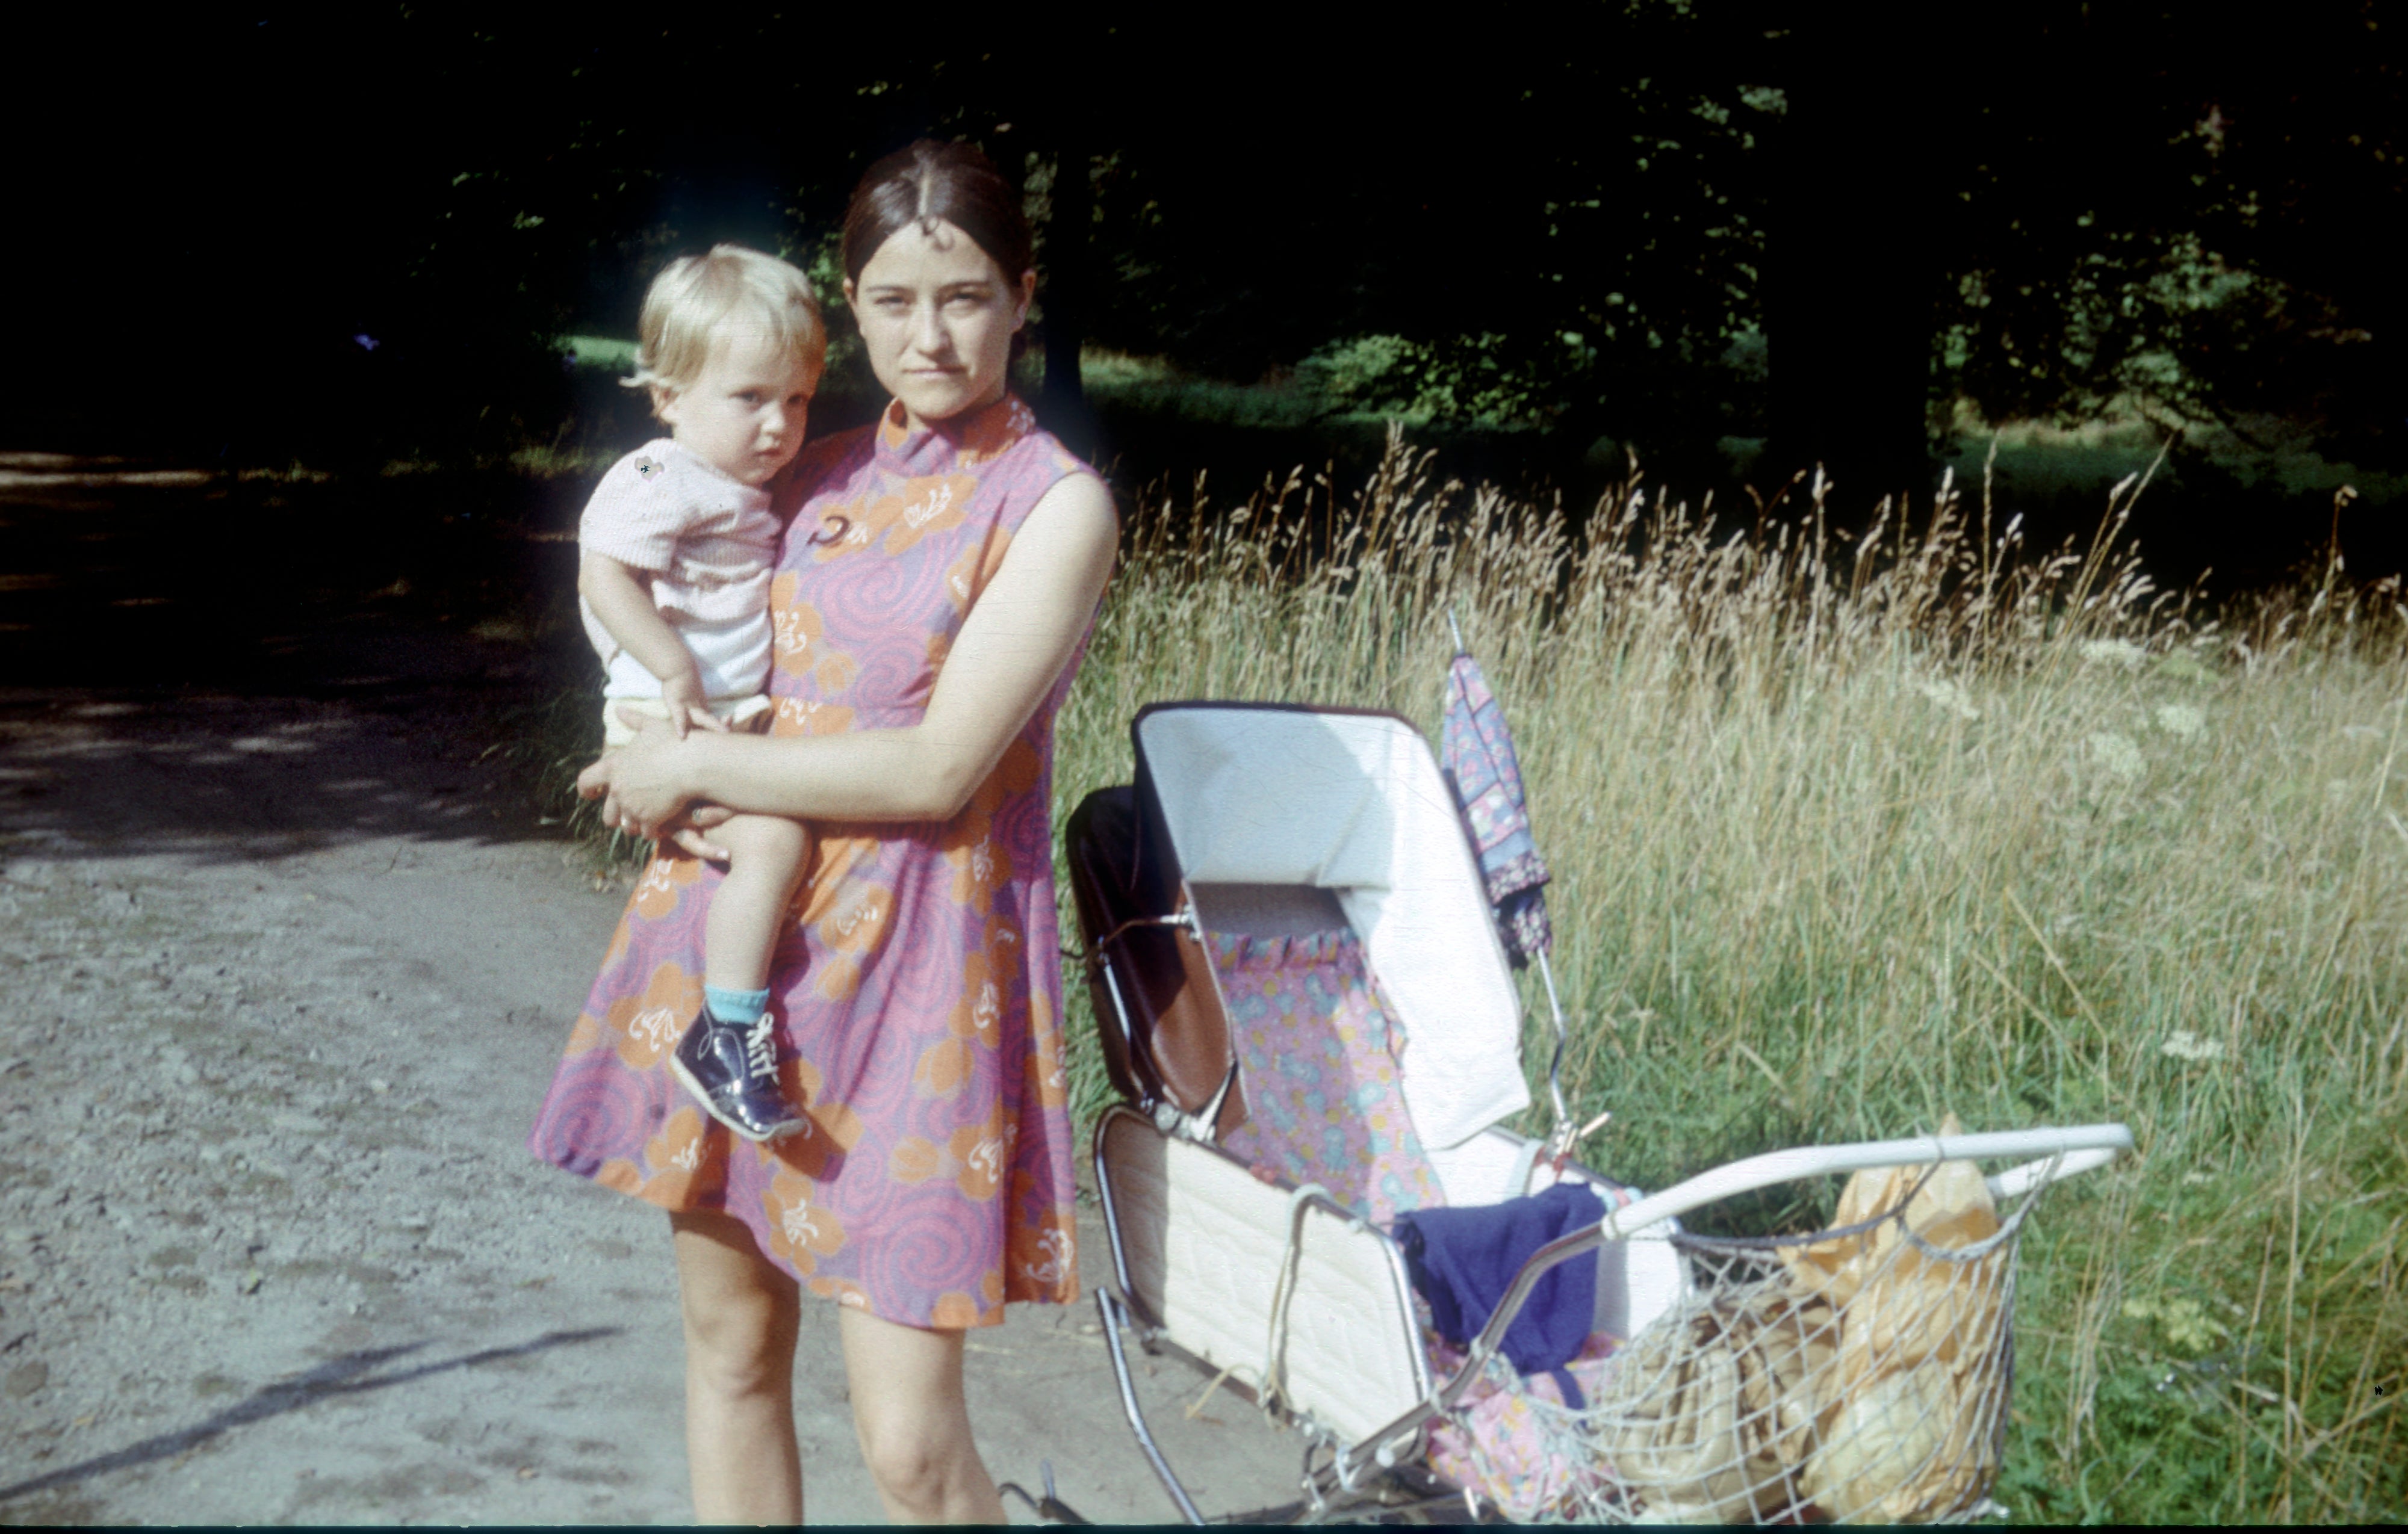 A woman in a patterned dress holds a young child next to a pram on a rural path